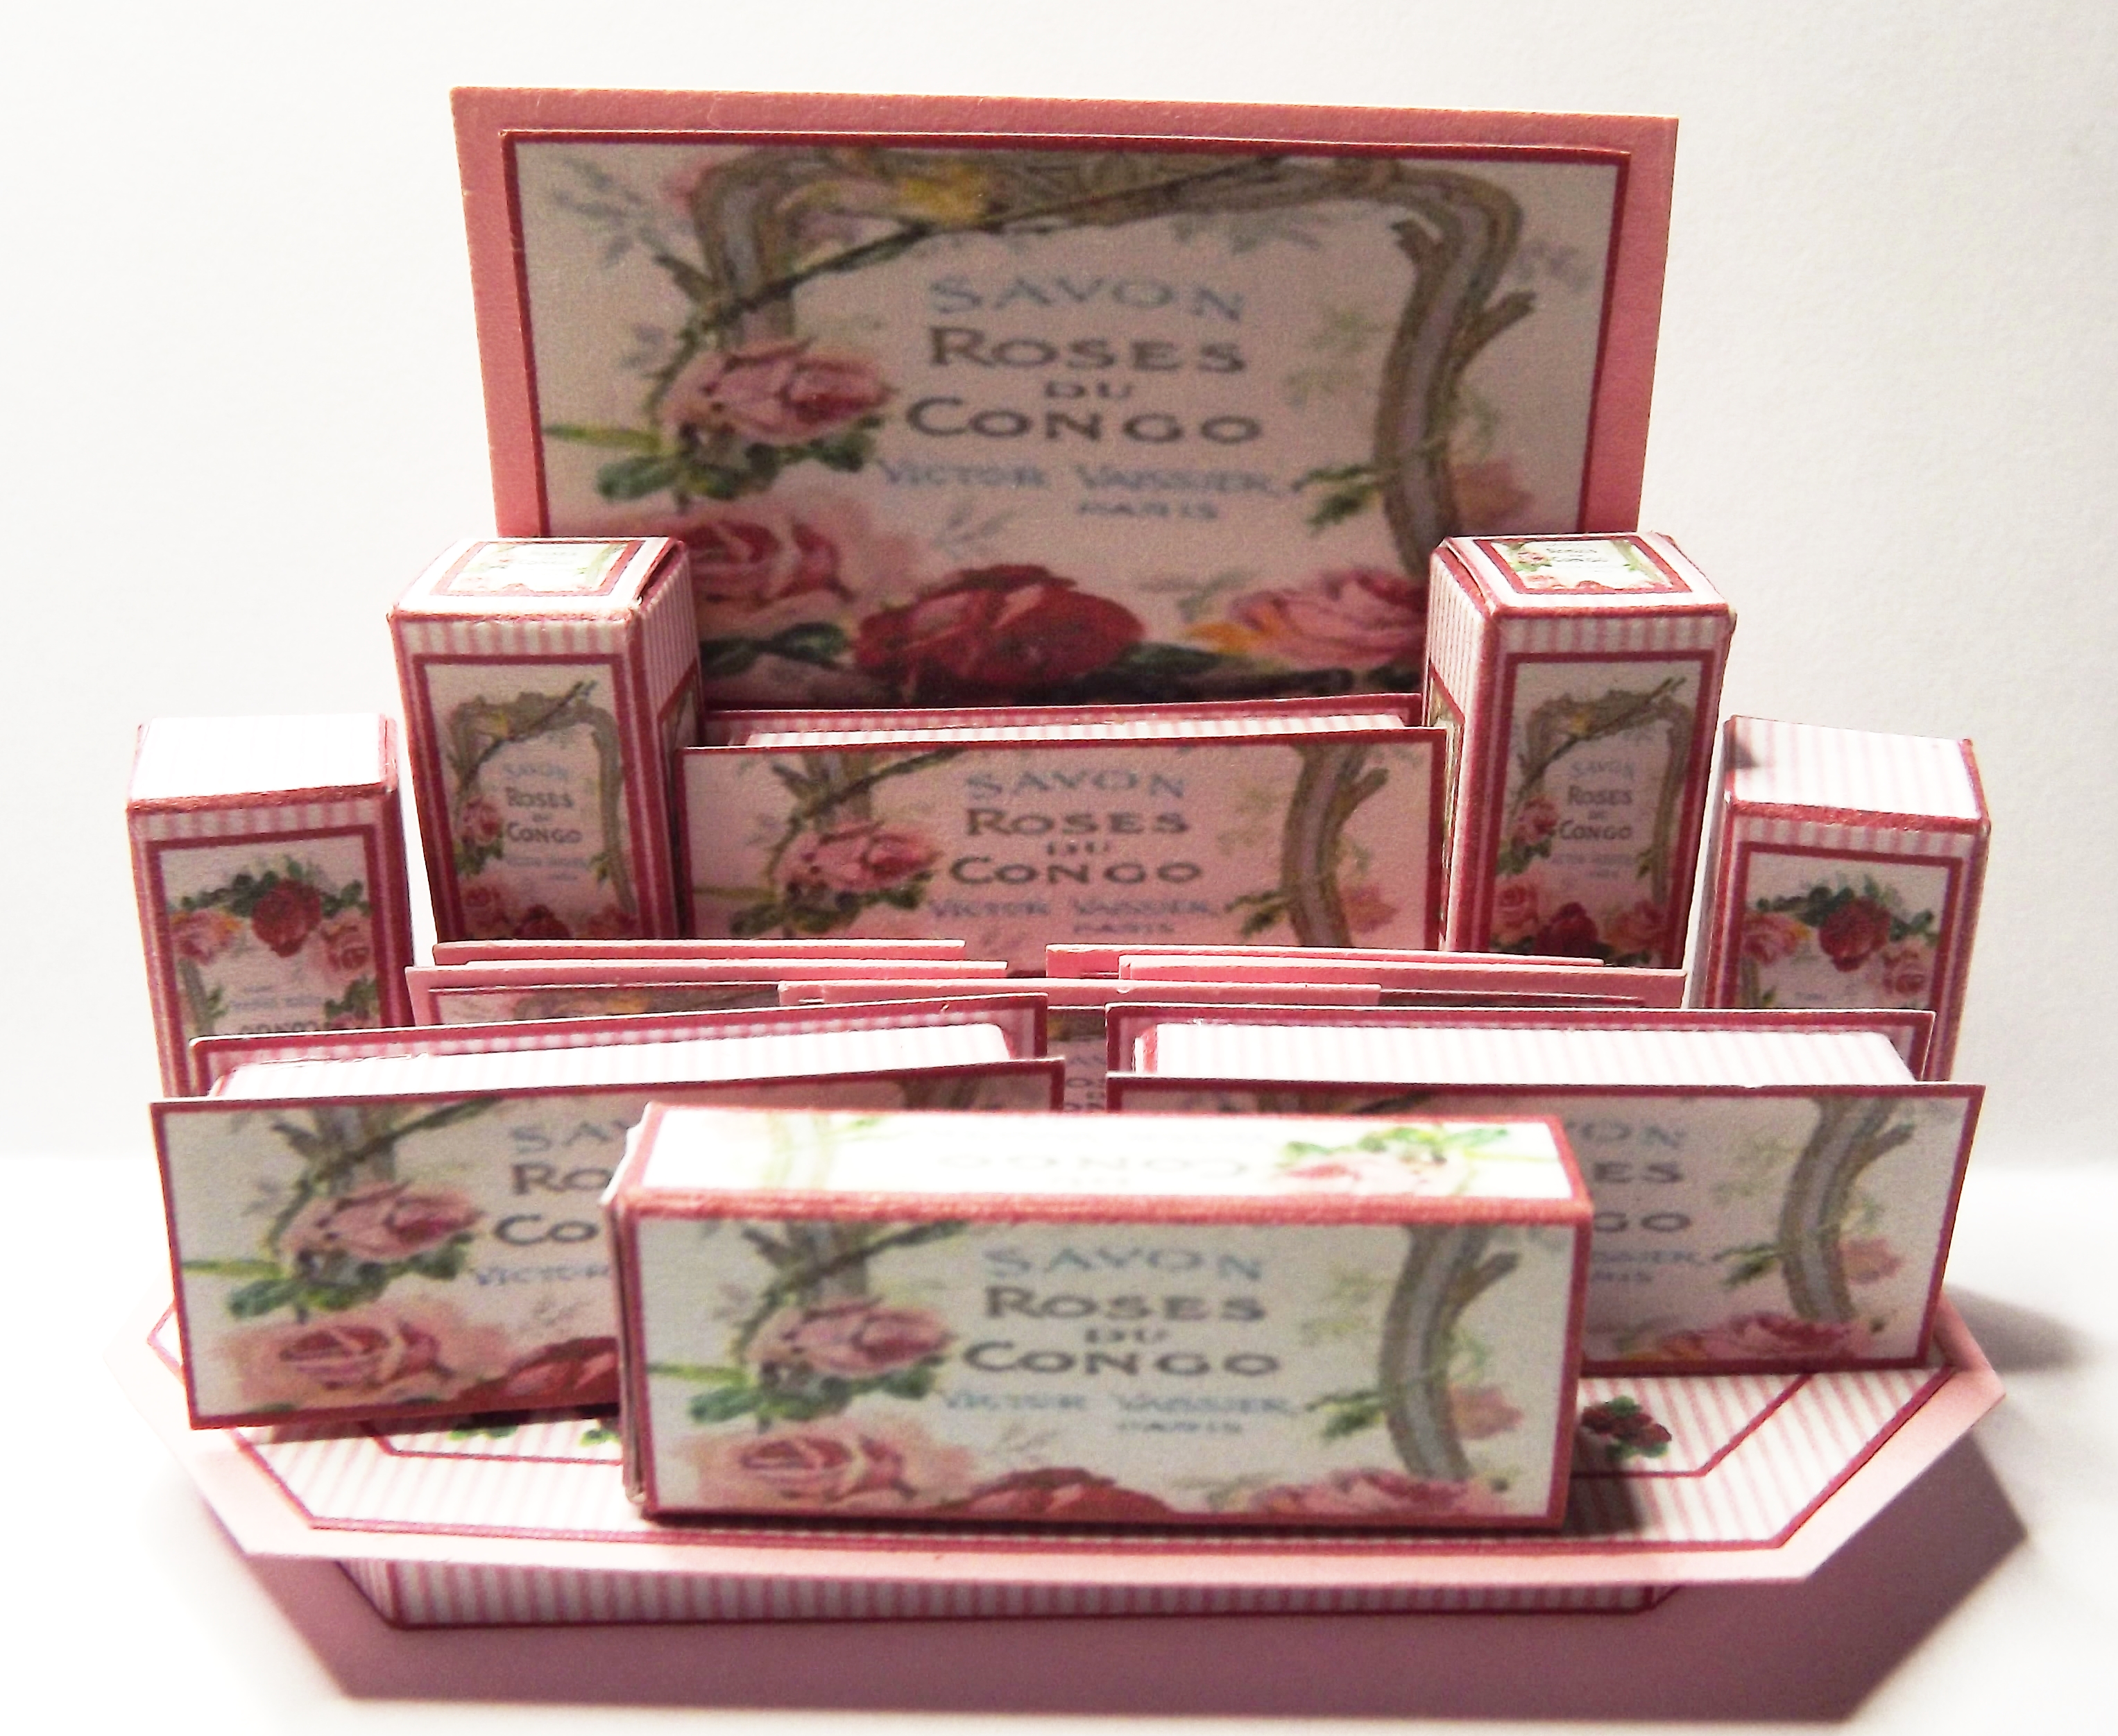 ROSES DE CONGO TOILETRY STAND DISPLAY KIT